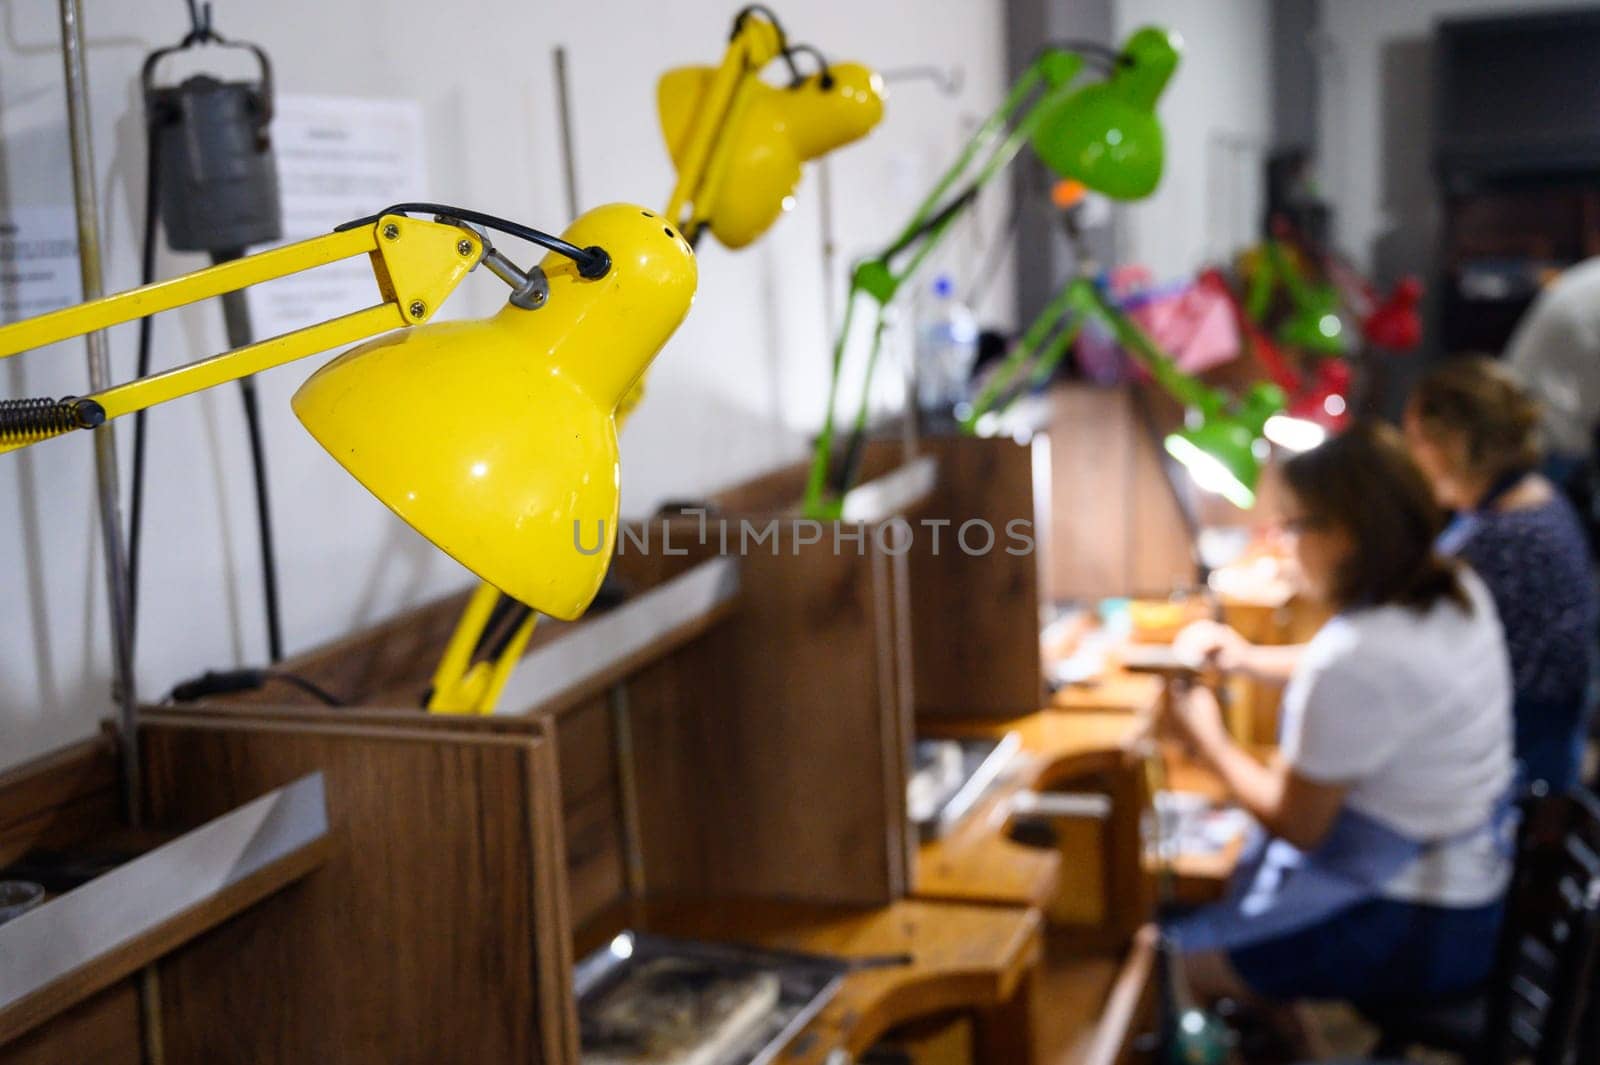 Interior of a busy art workshop with focused participants crafting under bright lamps